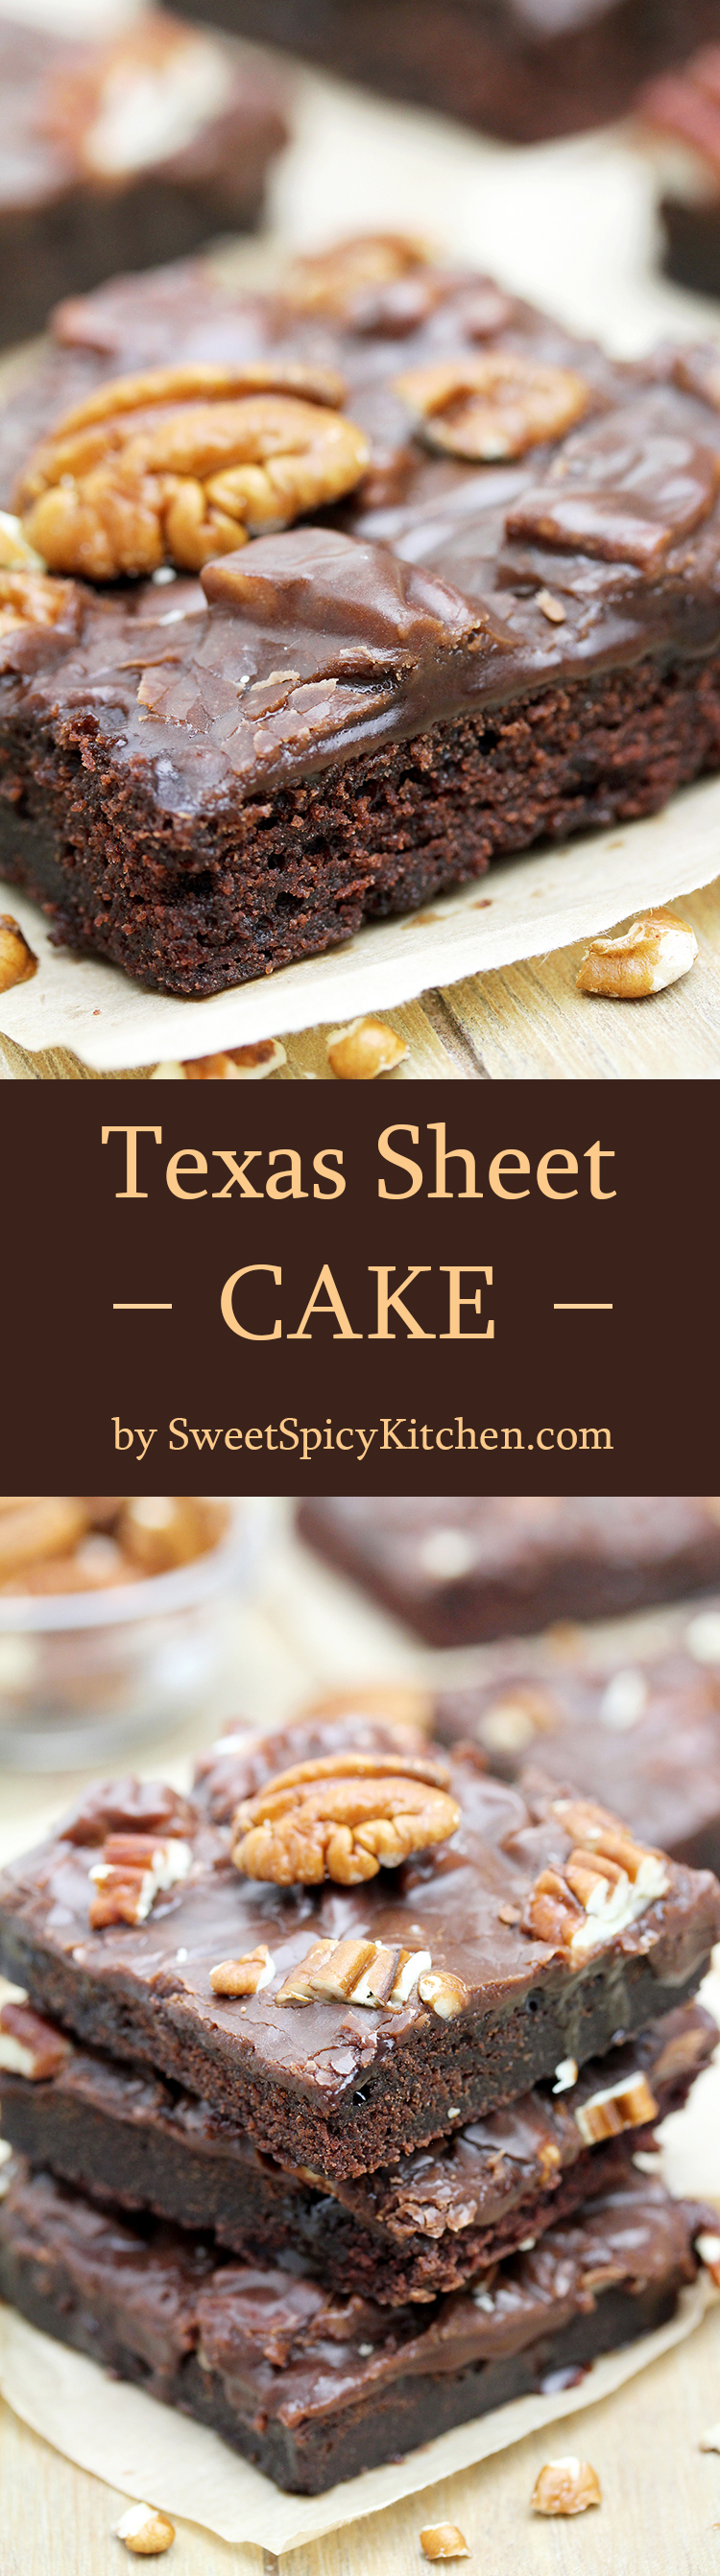 Texas Sheet Cake is thin, super moist chocolate cake, topped with warm chocolate frosting and pecans.